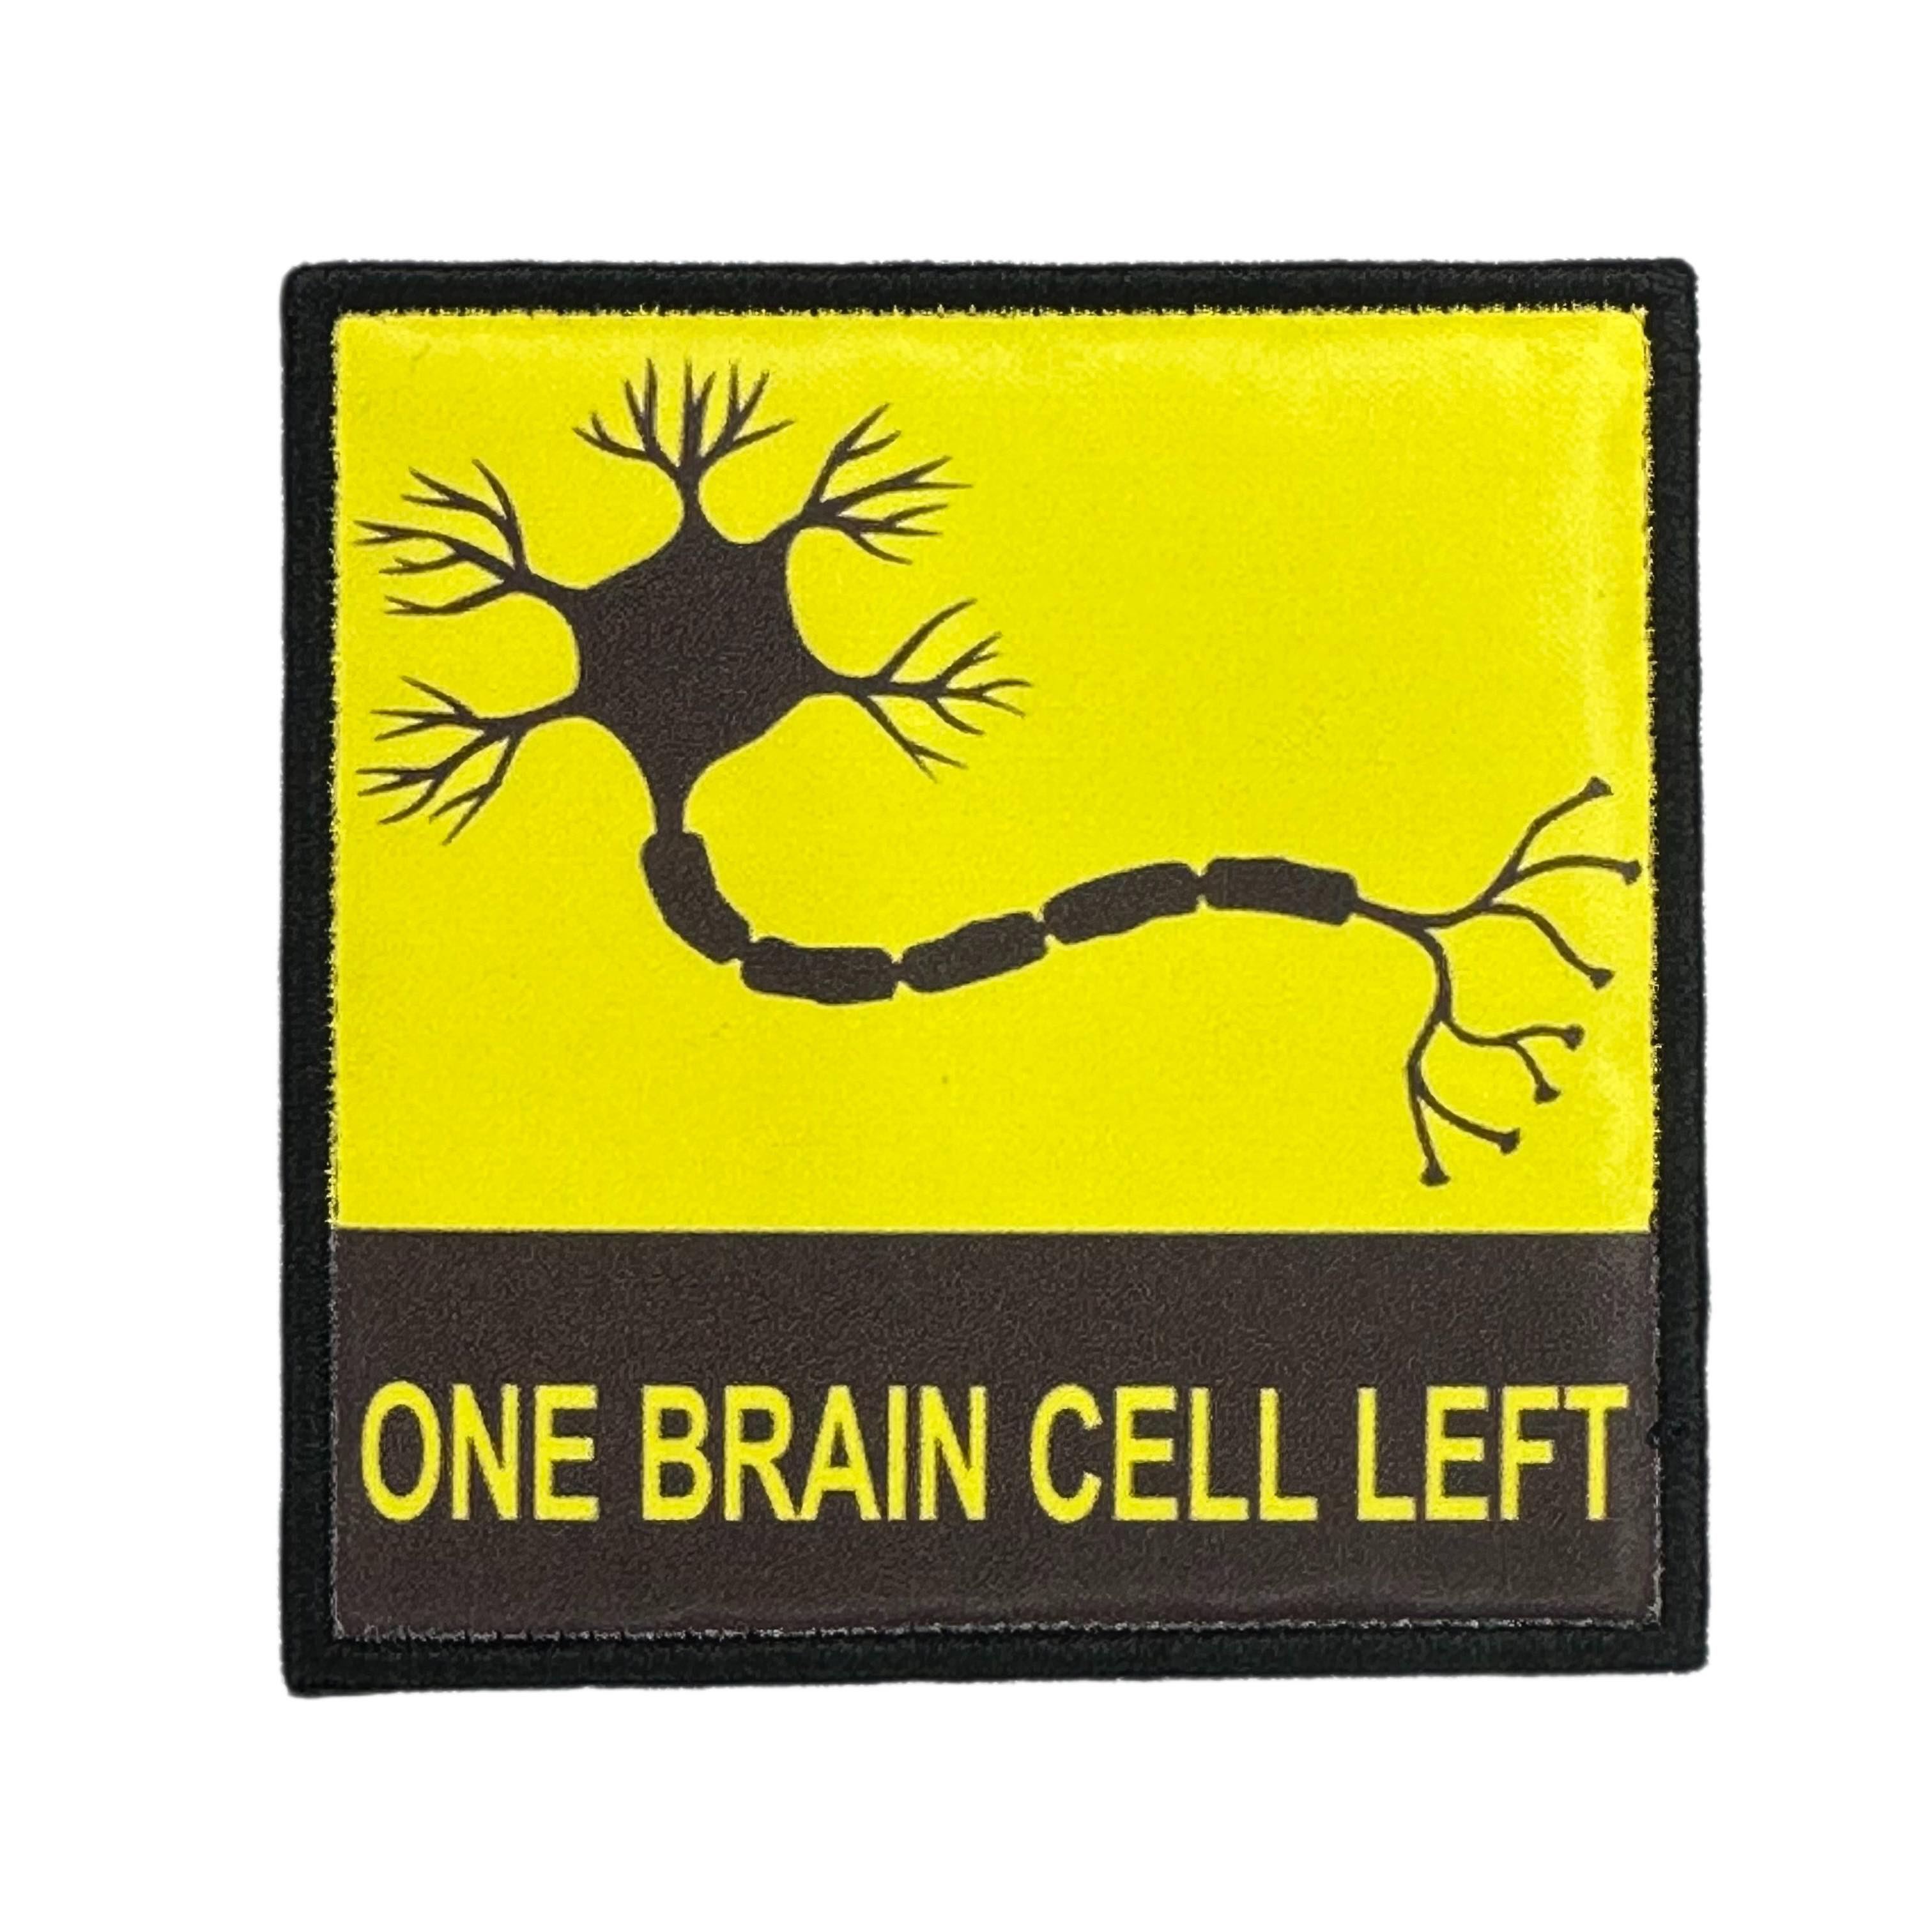 Printed Morale Patches - Neuron One Brain Cell Left Velcro Morale Patch